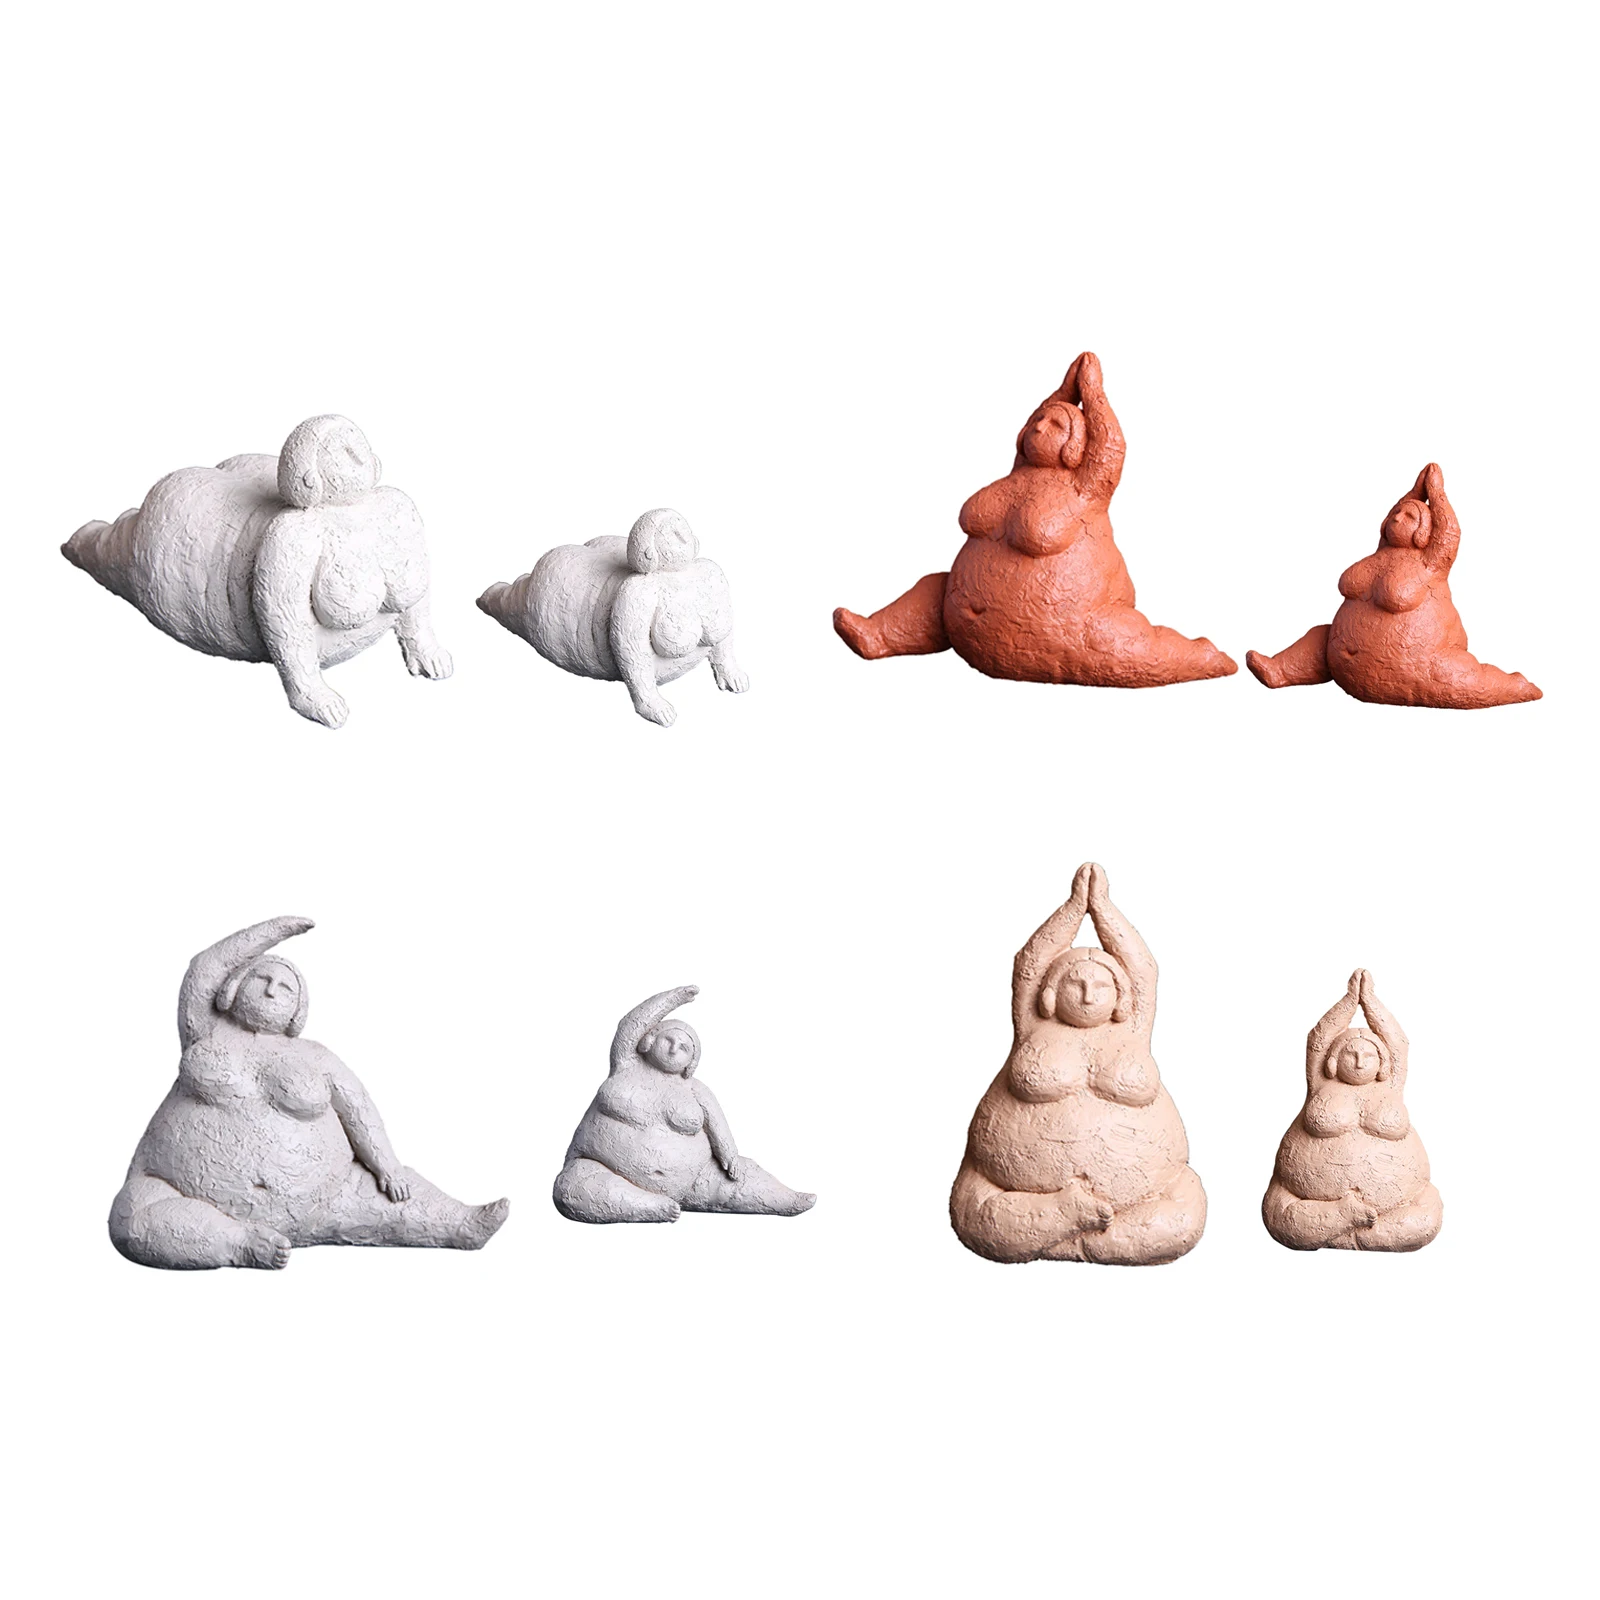 Modern Yoga Decor Resin Fat Lady Figurine Statue Ornament Home or Office Decoration